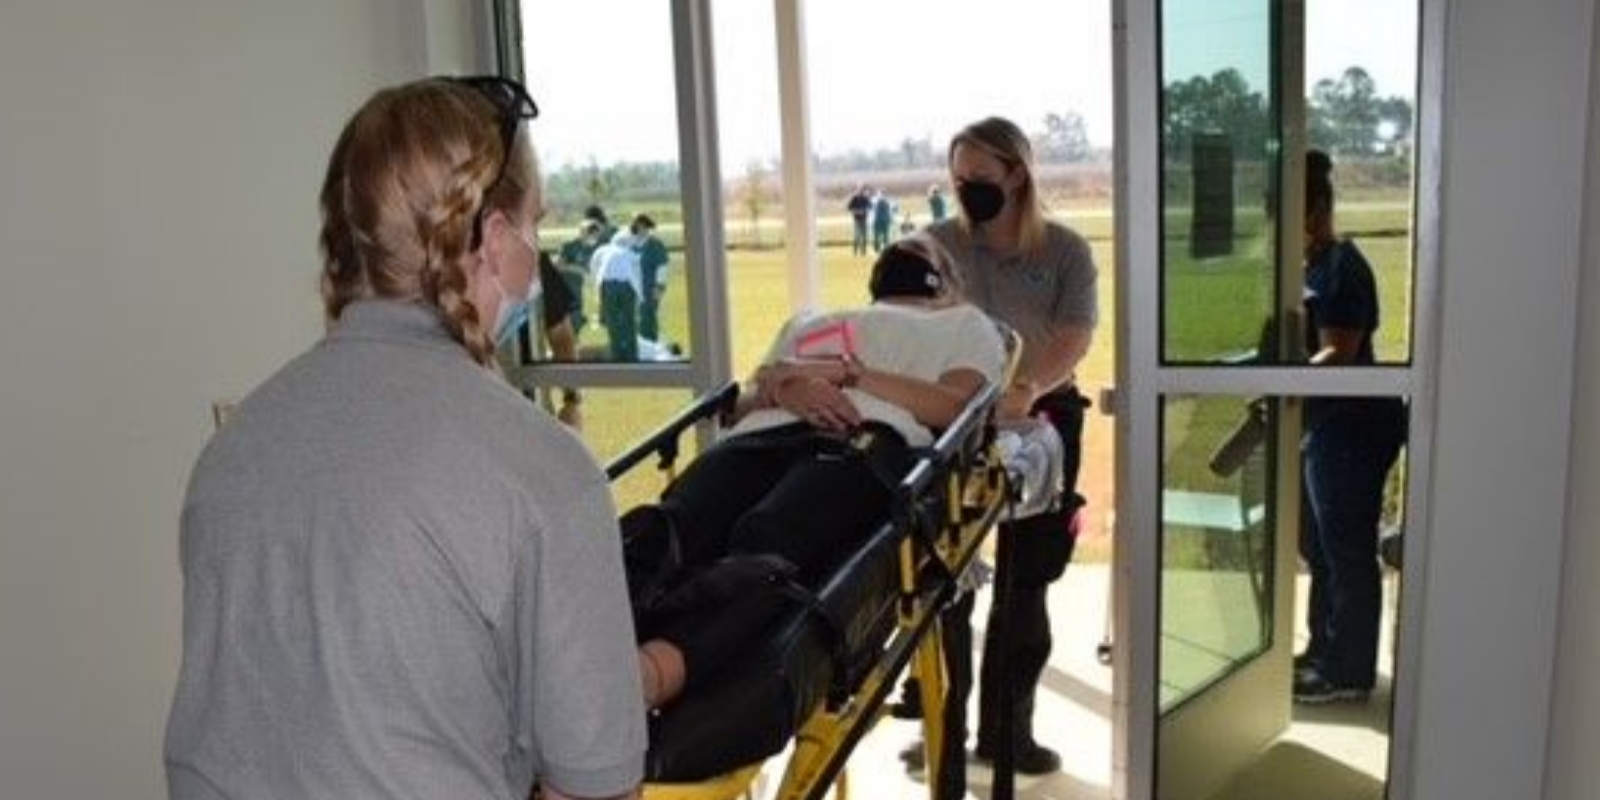 ems students performing training simulation